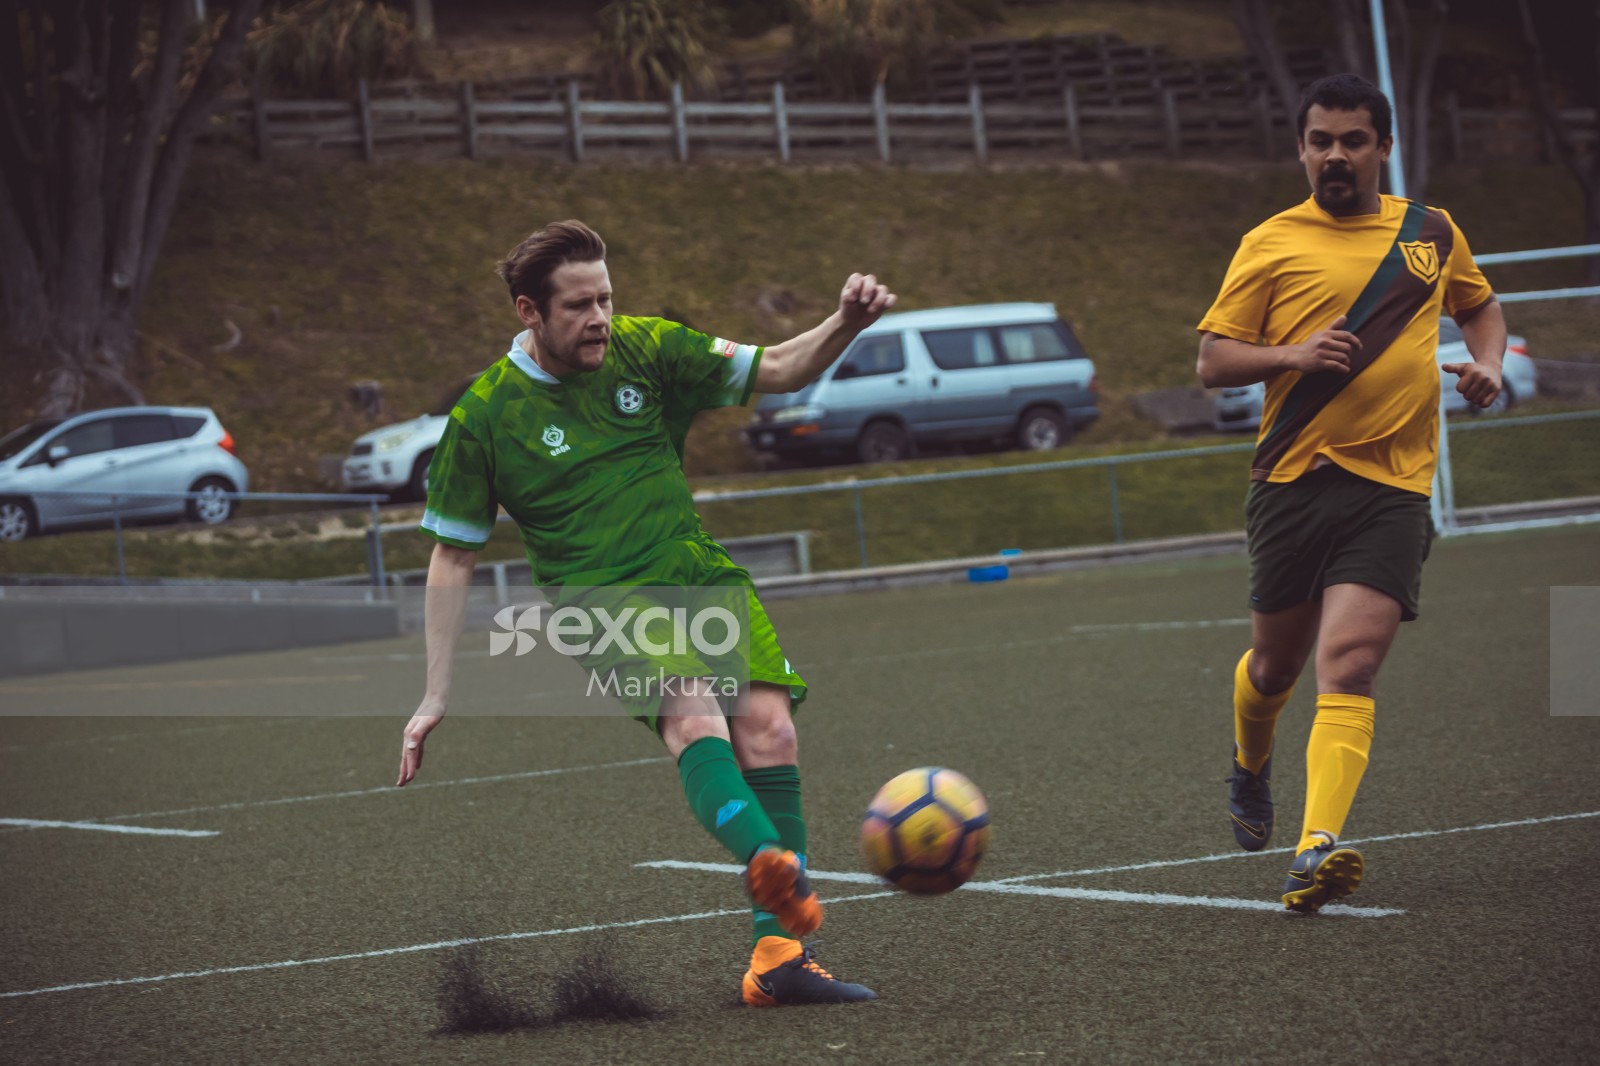 Player in green kit black and orange Nike cleats kicking football - Sports Zone sunday league